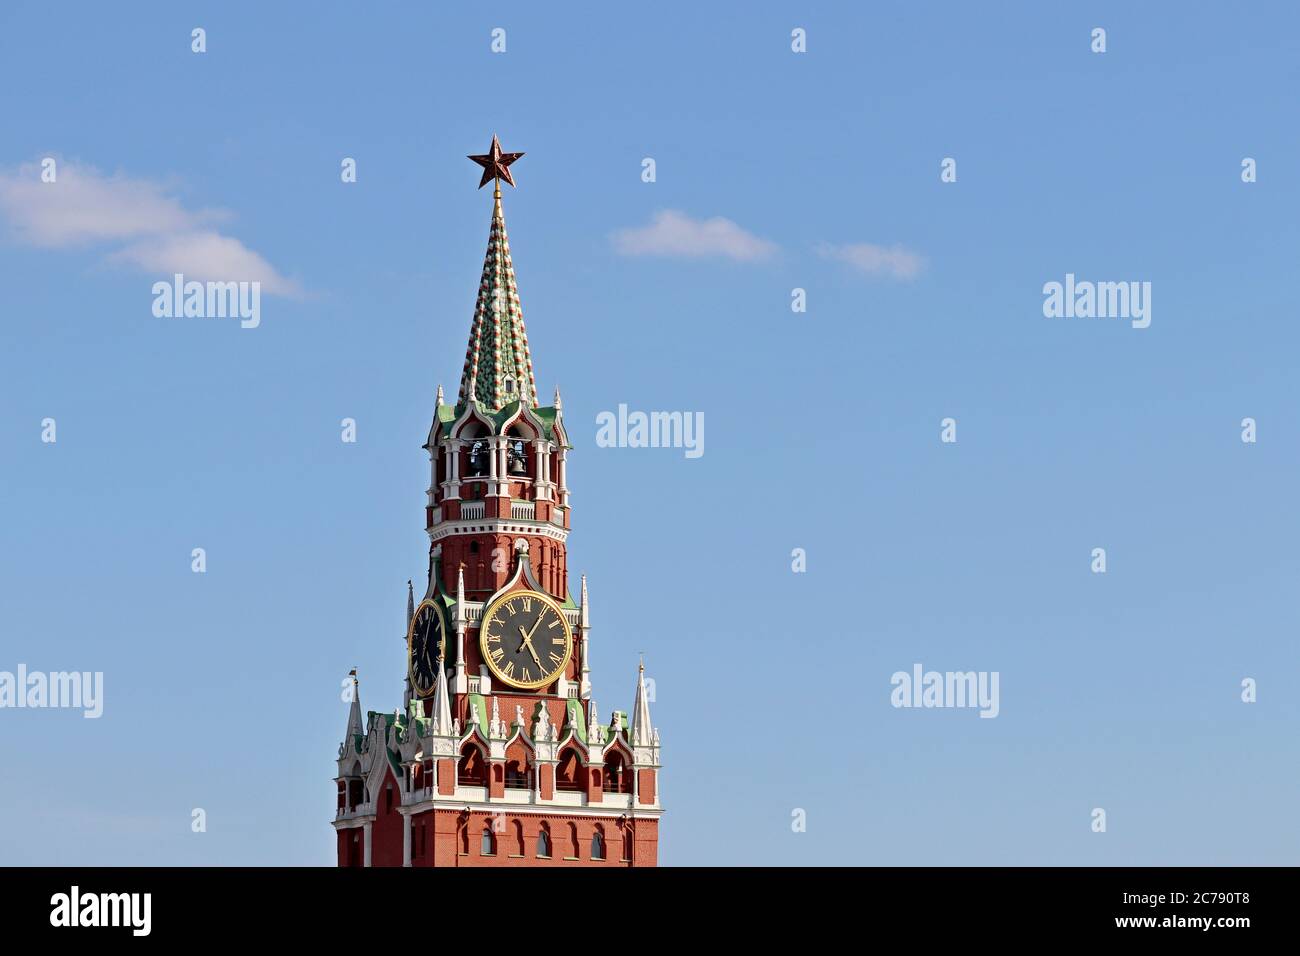 Chimes of Spasskaya tower, symbol of Russia on Red Square. Moscow Kremlin tower isolated on blue sky background Stock Photo